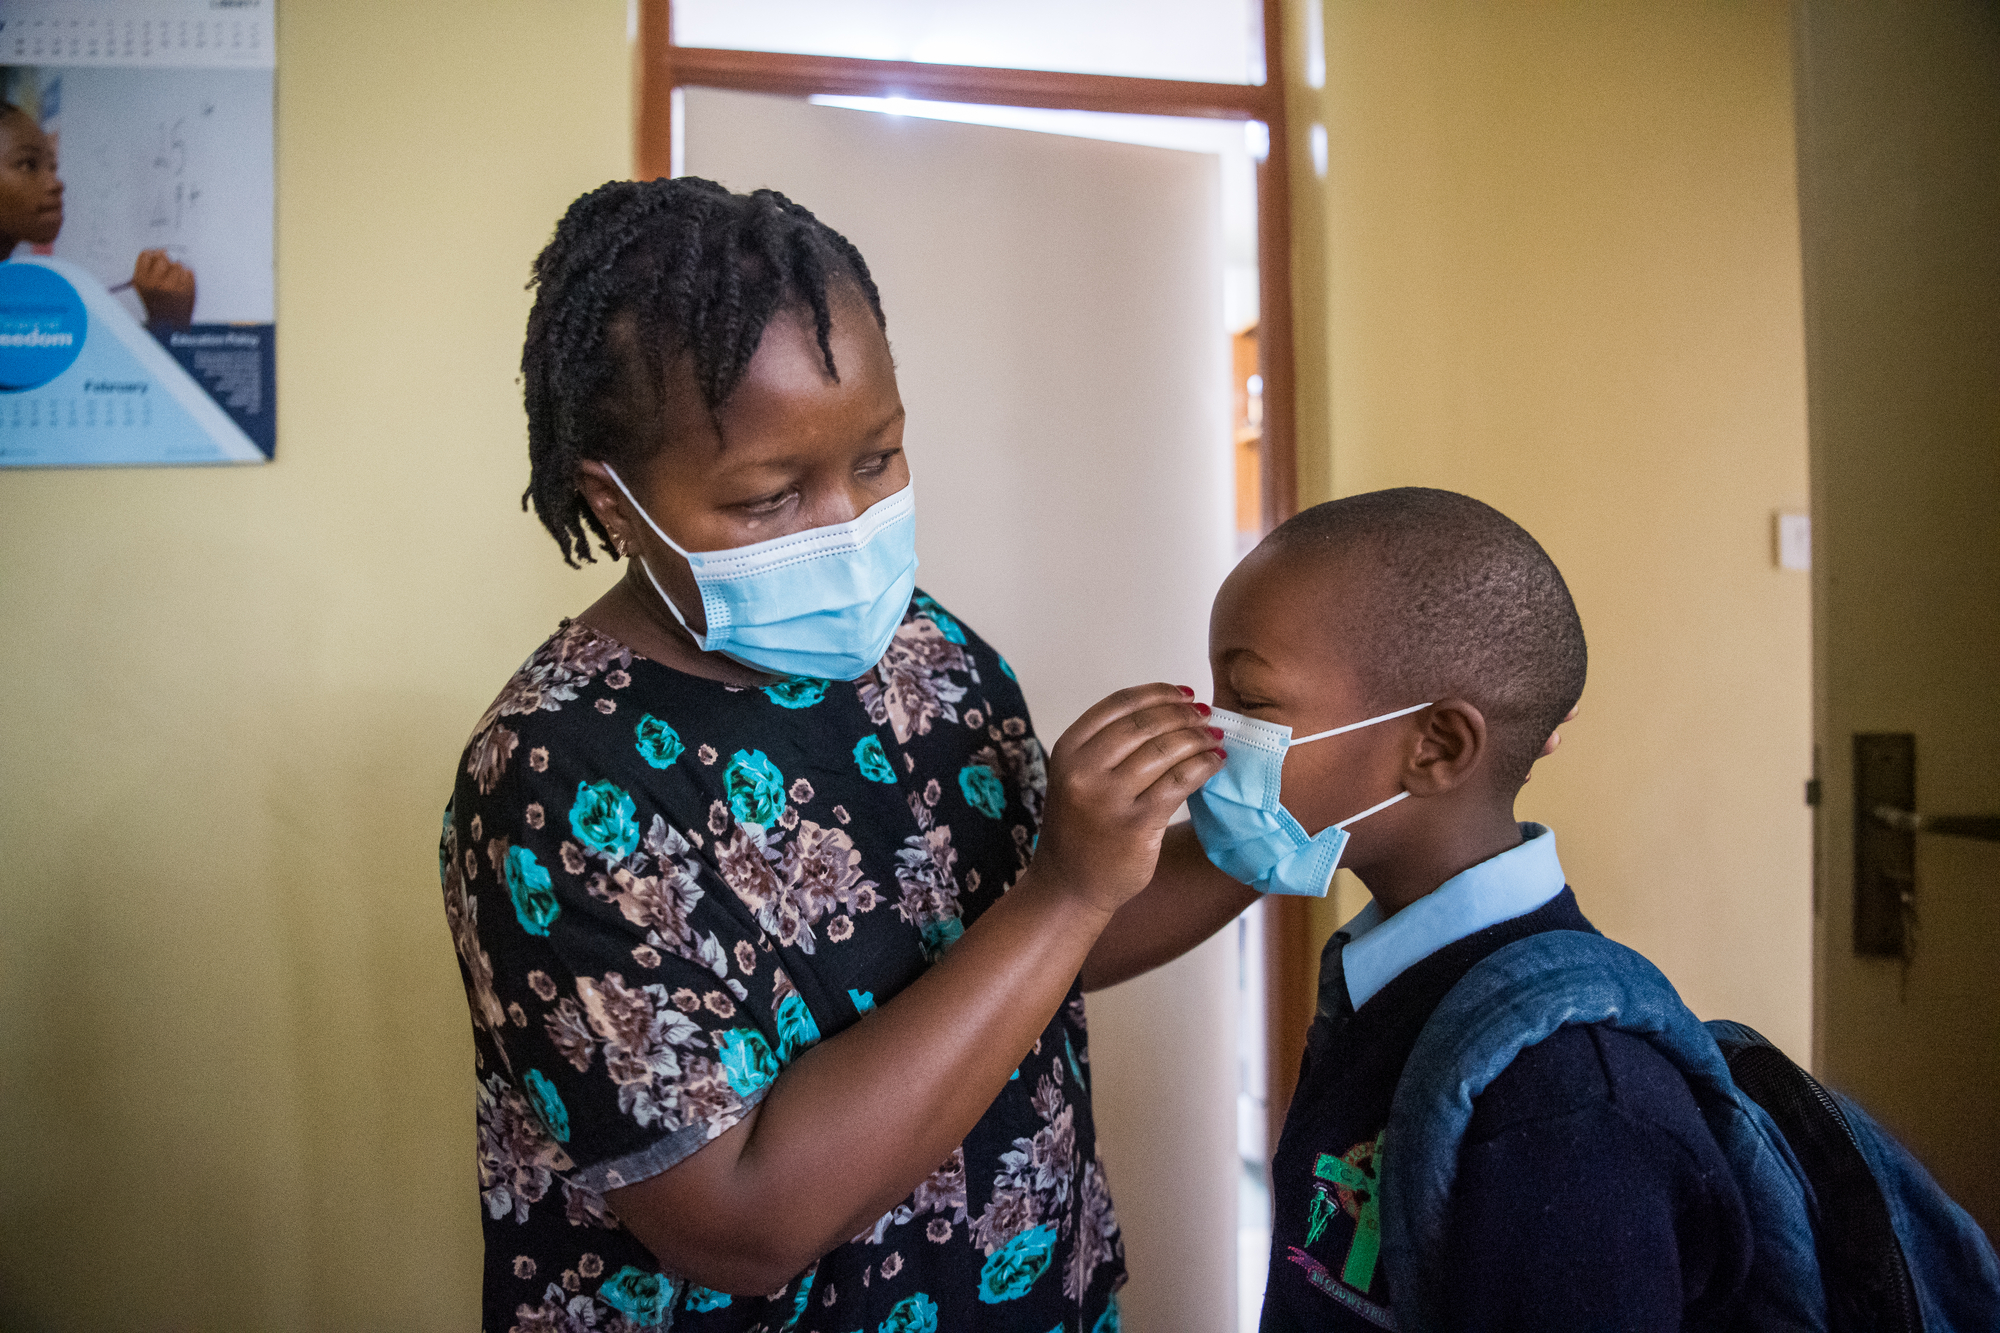  Janet Memo helps her children put masks on before leaving their small apartment in Nairobi, Kenya on February 22, 2021. The COVID-19 pandemic has challenged many women to balance working from home and caring for their children. 